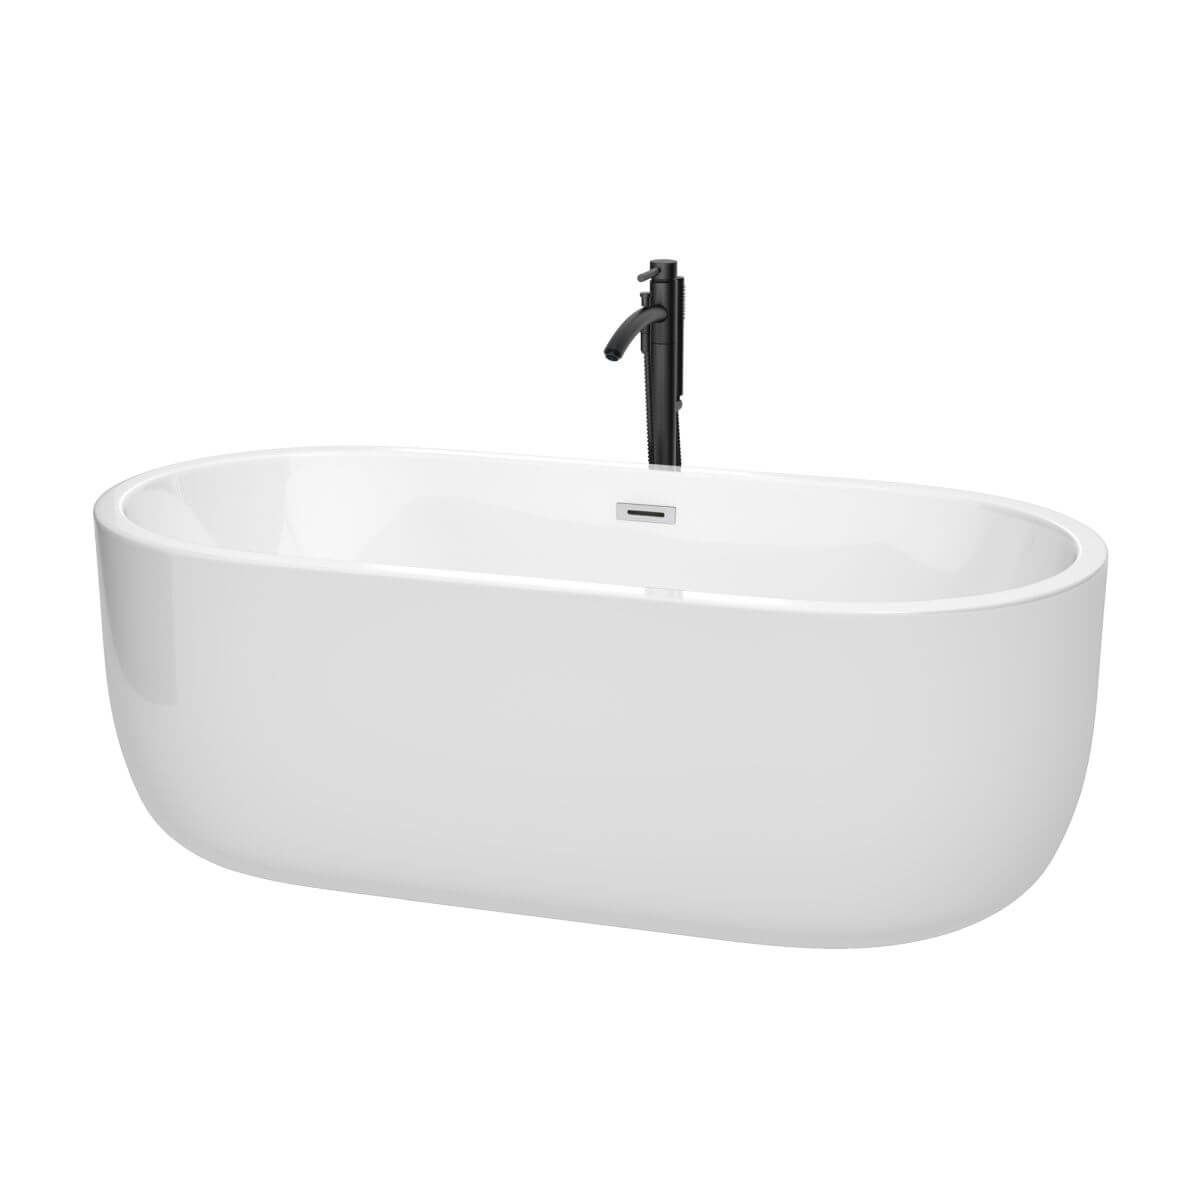 Wyndham Collection Juliette 67 inch Freestanding Bathtub in White with Polished Chrome Trim and Floor Mounted Faucet in Matte Black - WCOBT101367PCATPBK